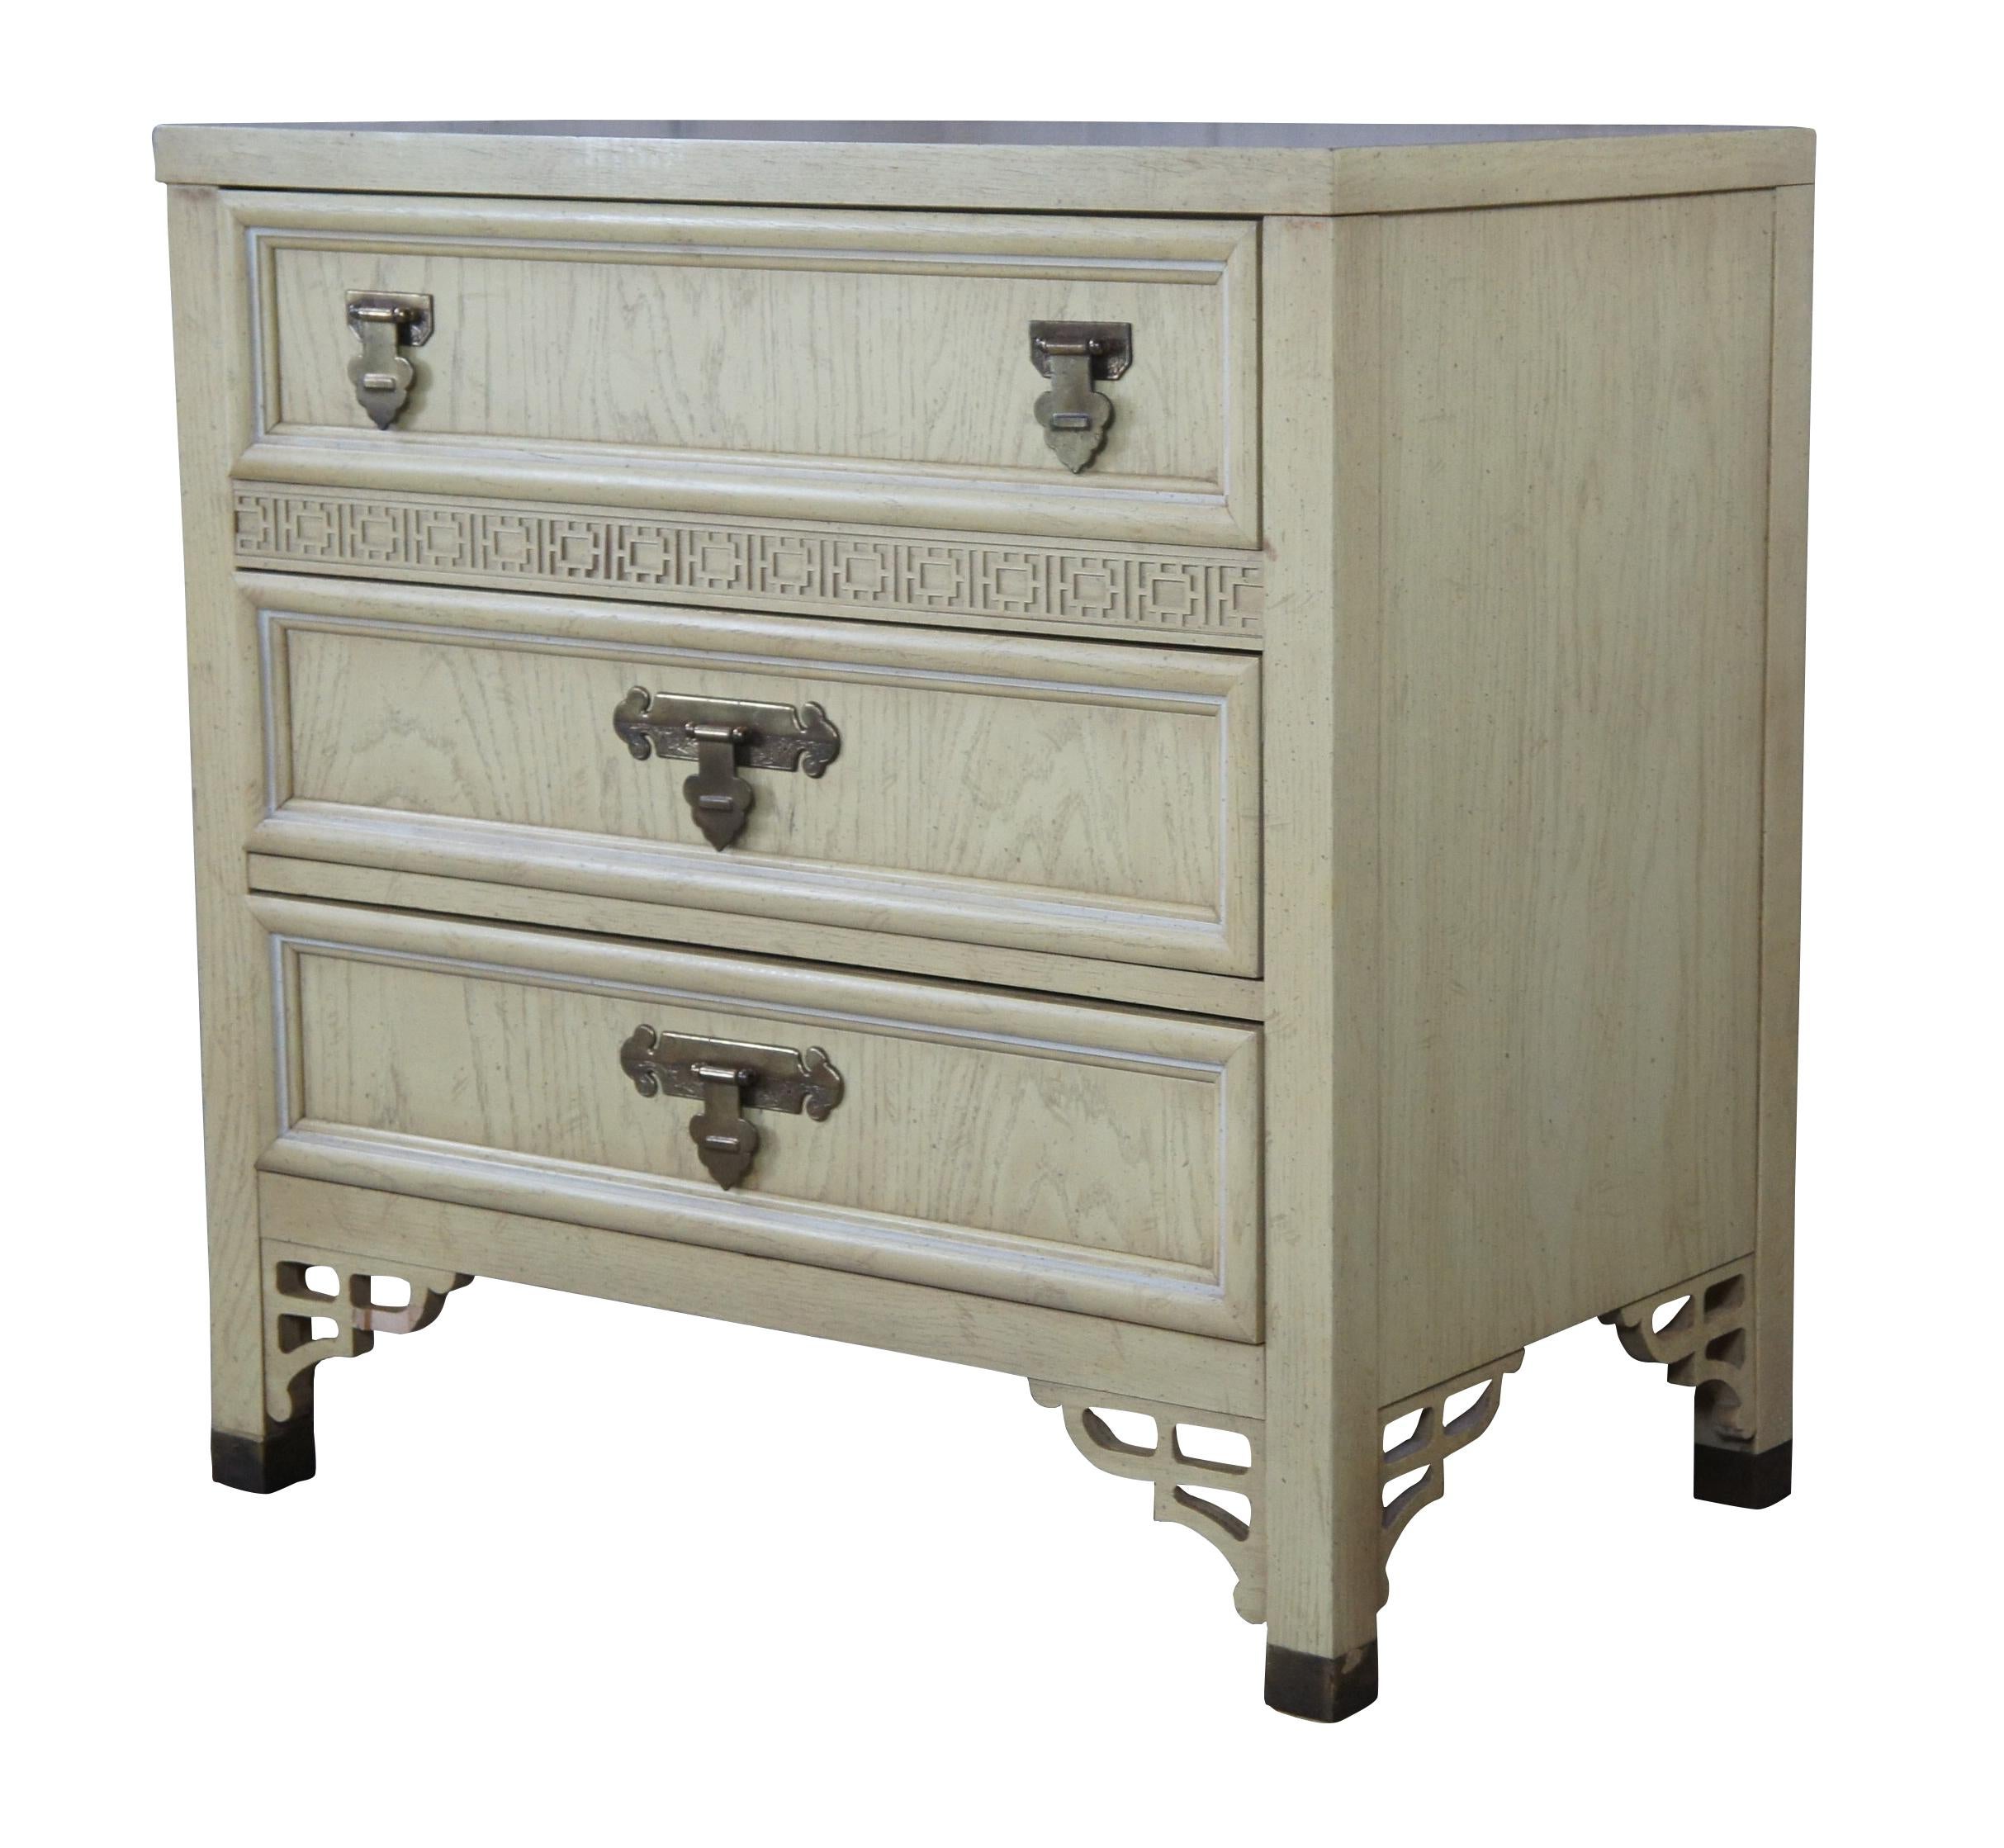 Mid-20th century pickled oak Campaign chest of drawers by Dixie. Part of their Shangri La chinoiserie collection. Features three dovetailed drawers, fretwork and brass hardware. Naturally distressed. Marked Bachelor Chest 322-513 along the back.